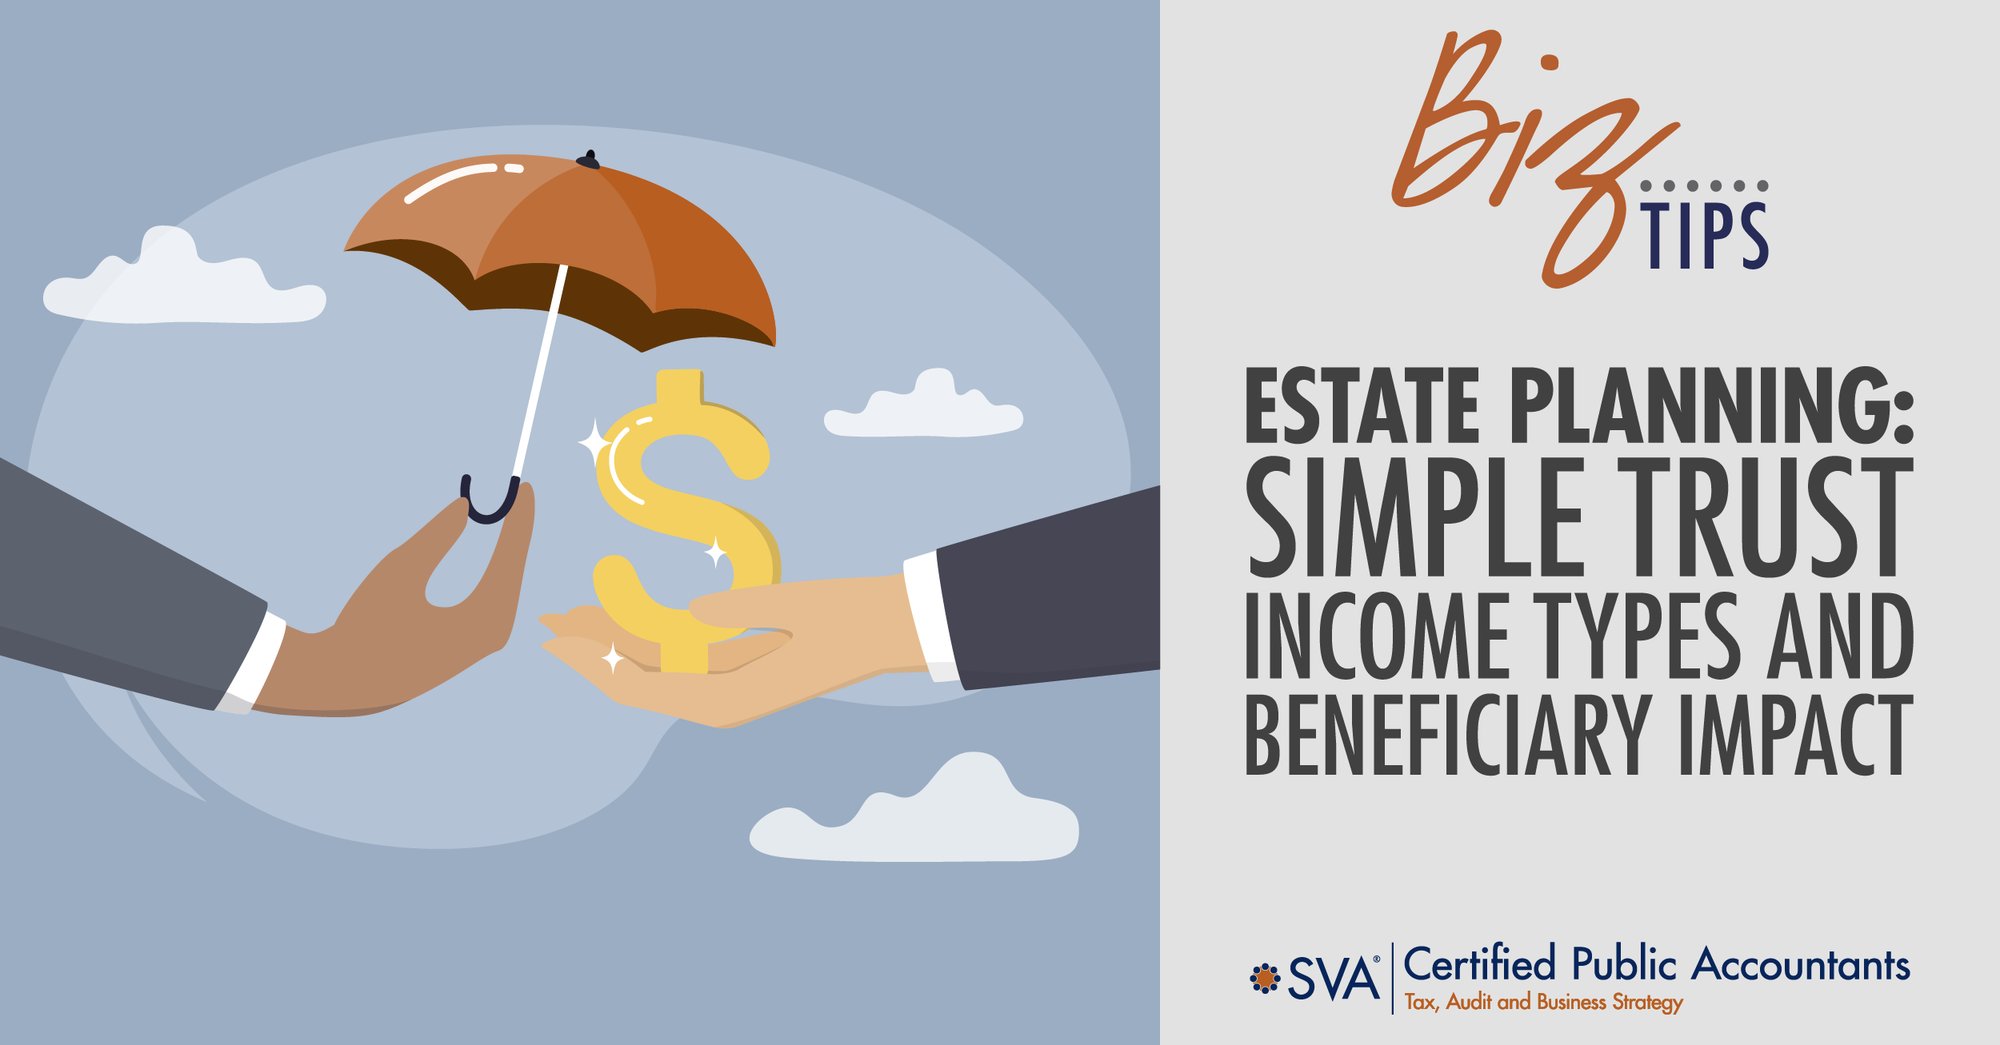 sva-certified-public-accountants-estate-planning-simple-trust-income-types-and-beneficiary-impact